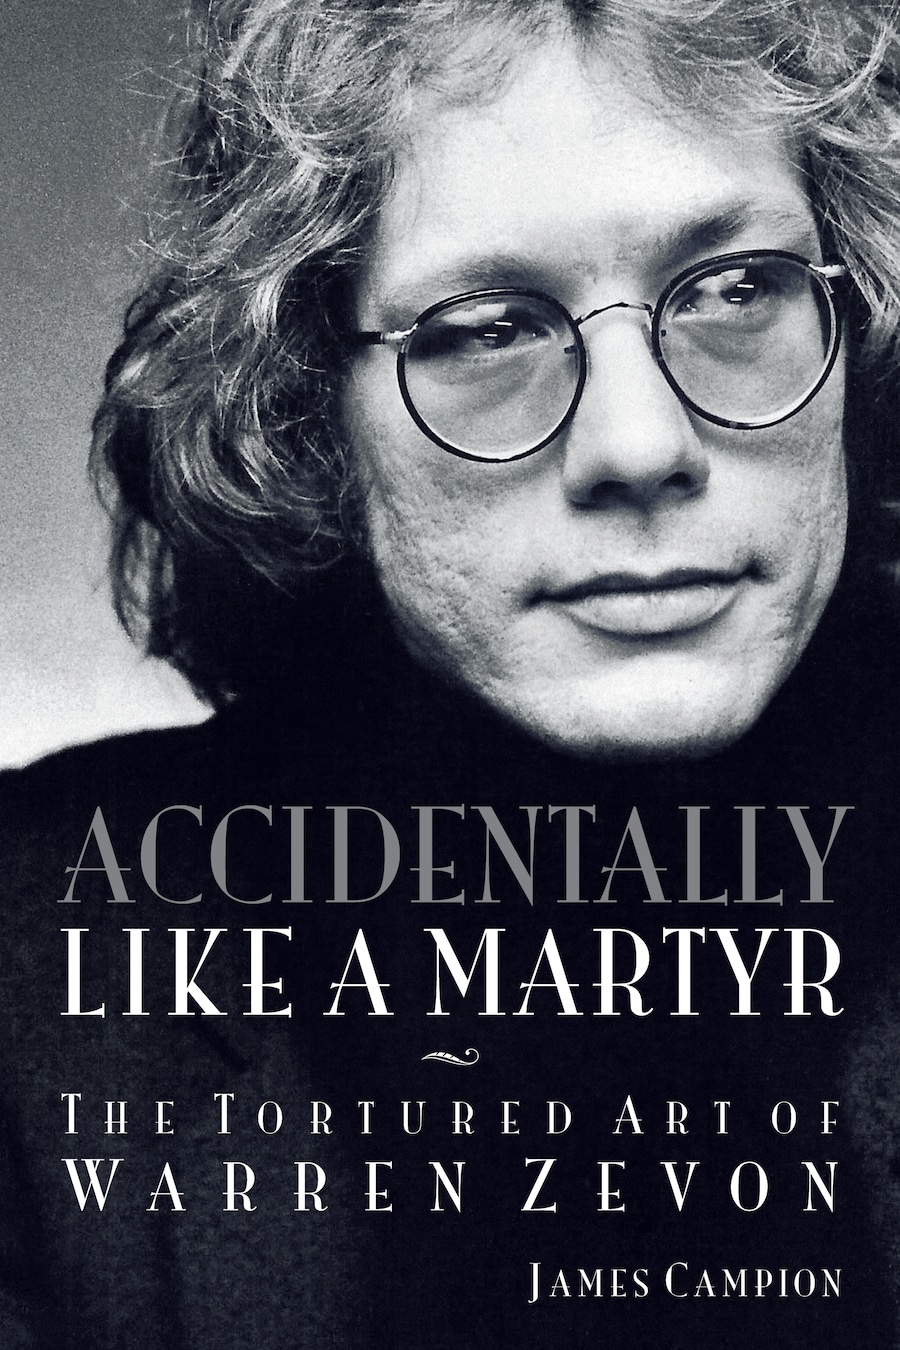 Book Review: Accidentally Like a Martyr: The Tortured Art of Warren Zevon